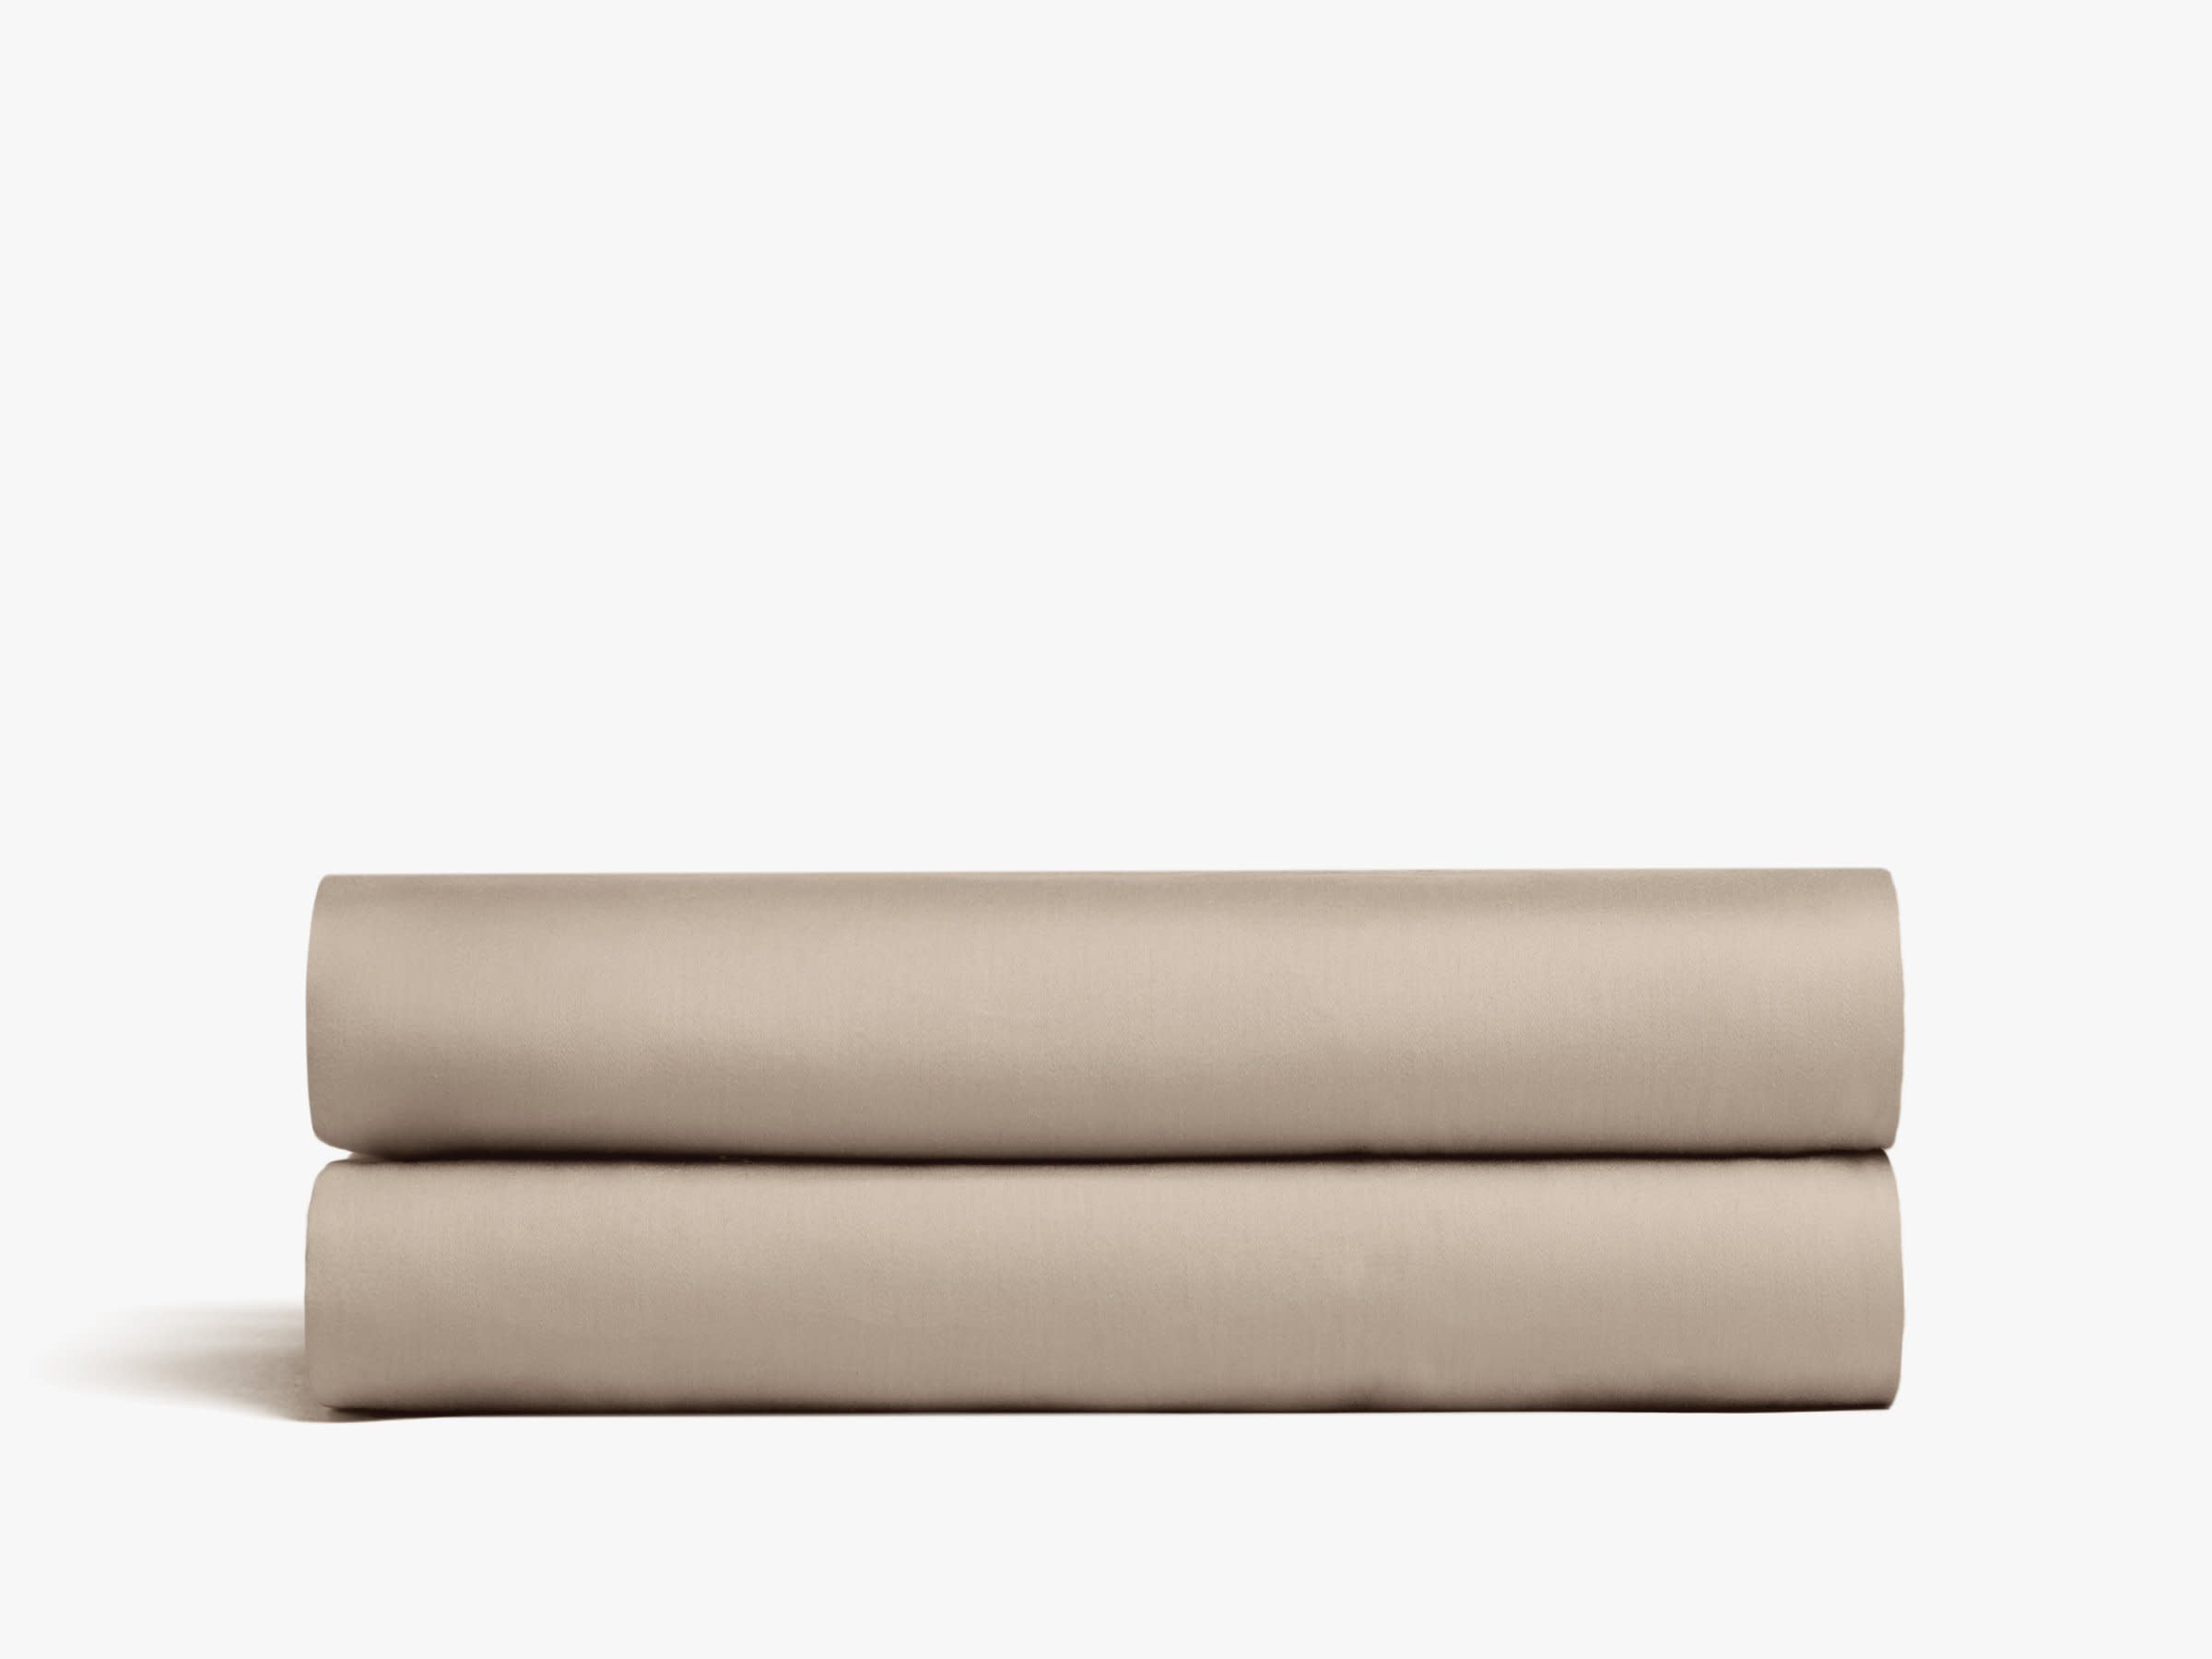 Sateen Fitted Sheet Product Image